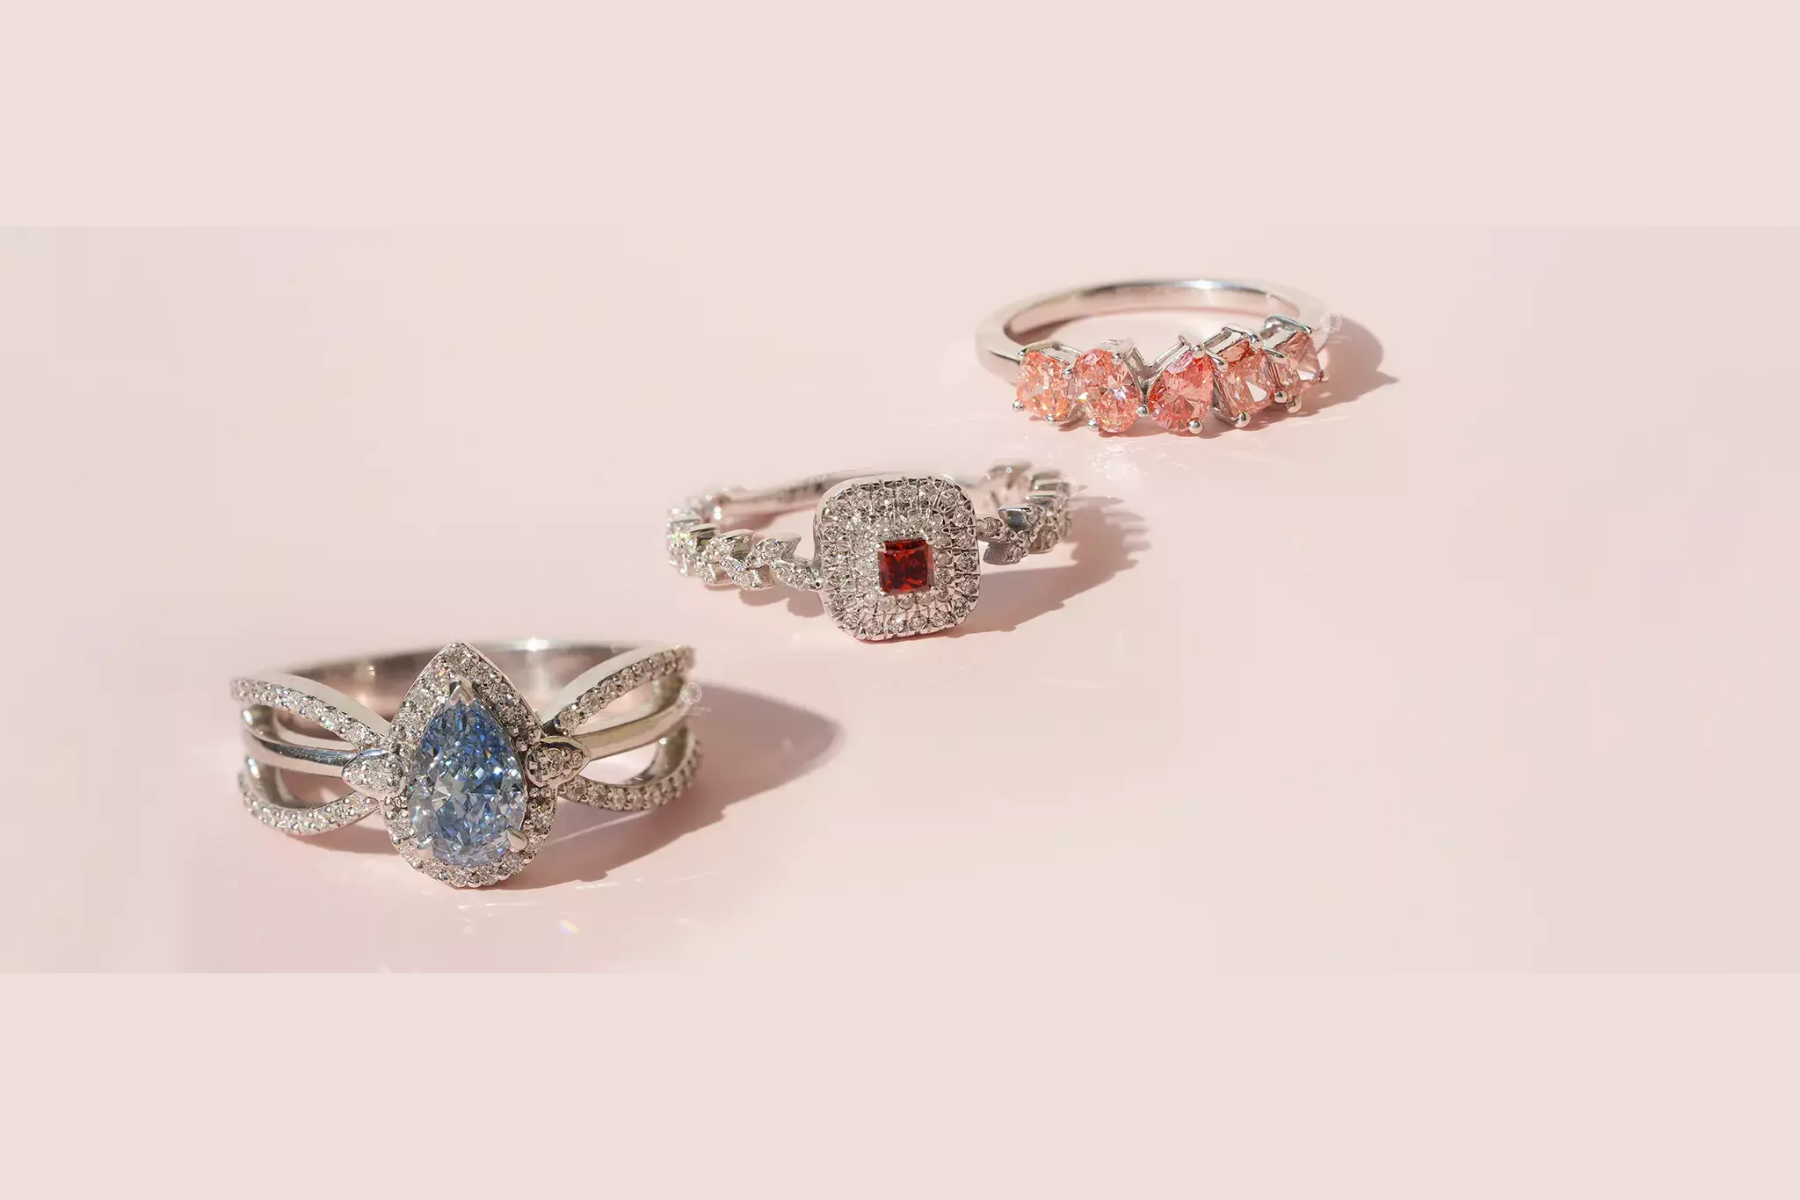 Three diamond engagement rings of different colors